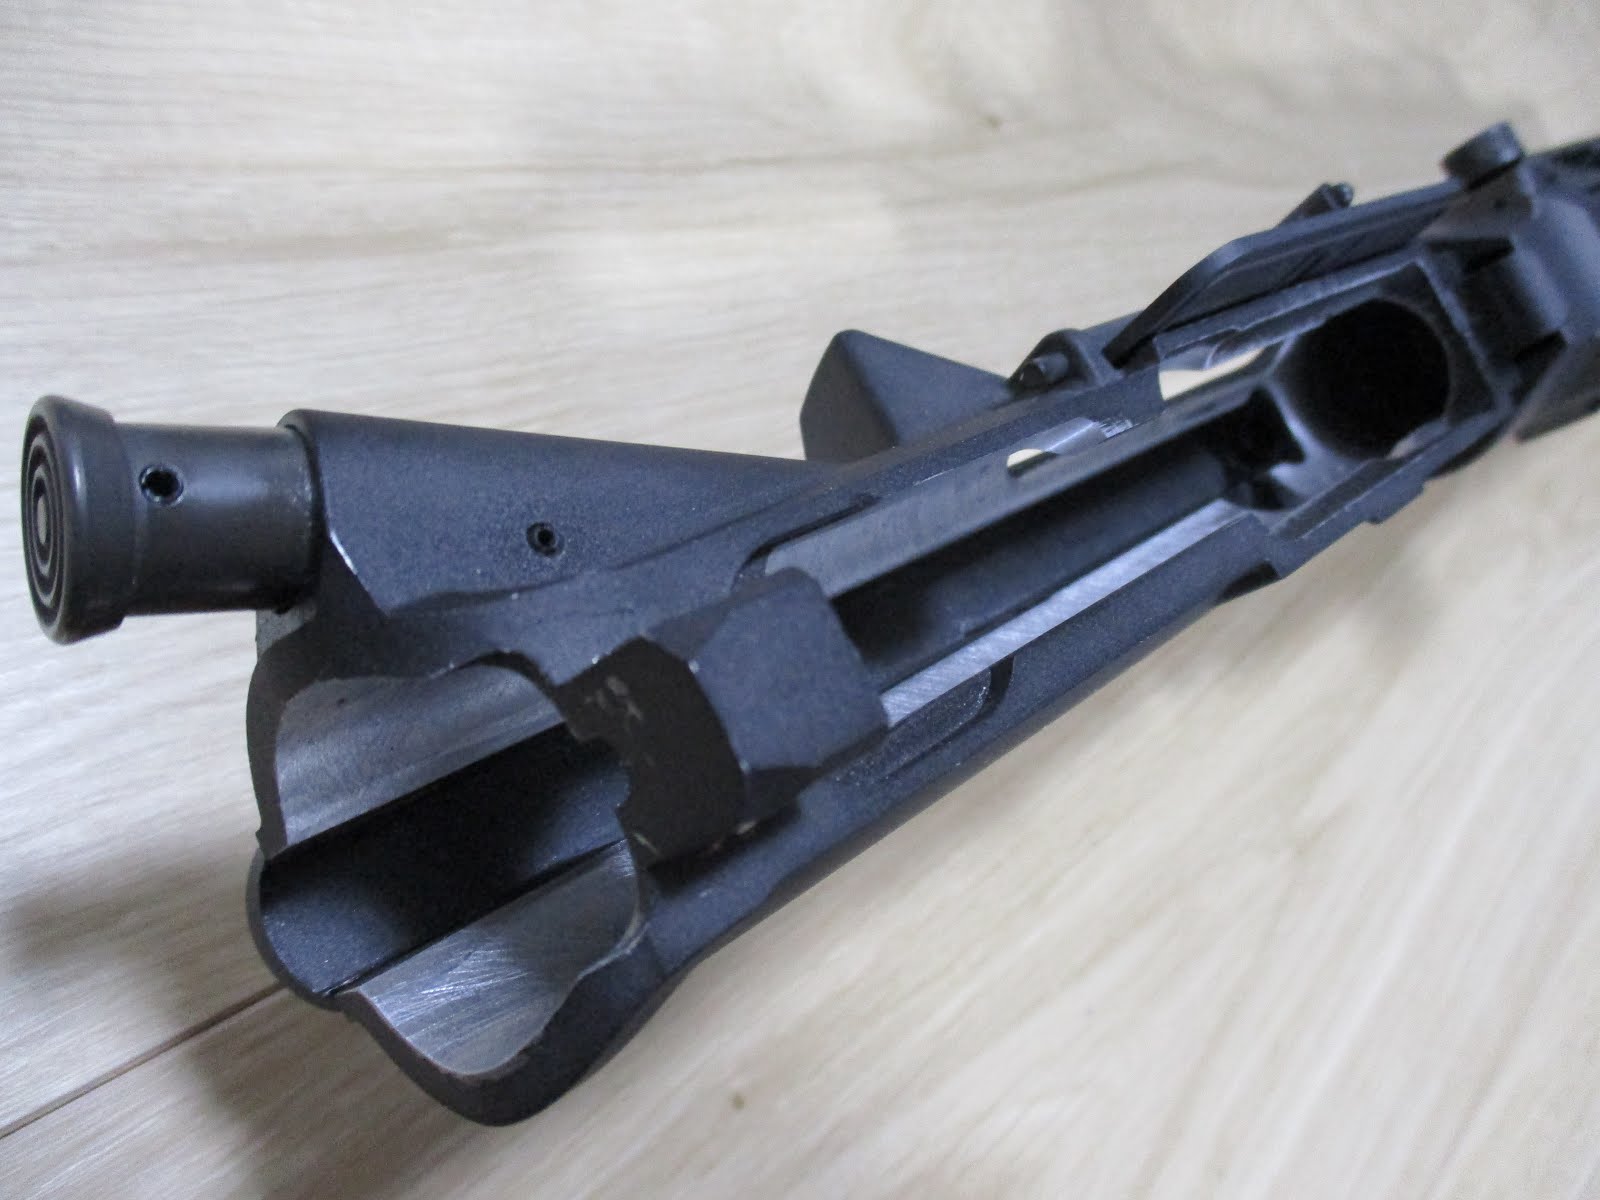 How to convert the VFC HK416 GBB upper receiver to suitable for the PTW.